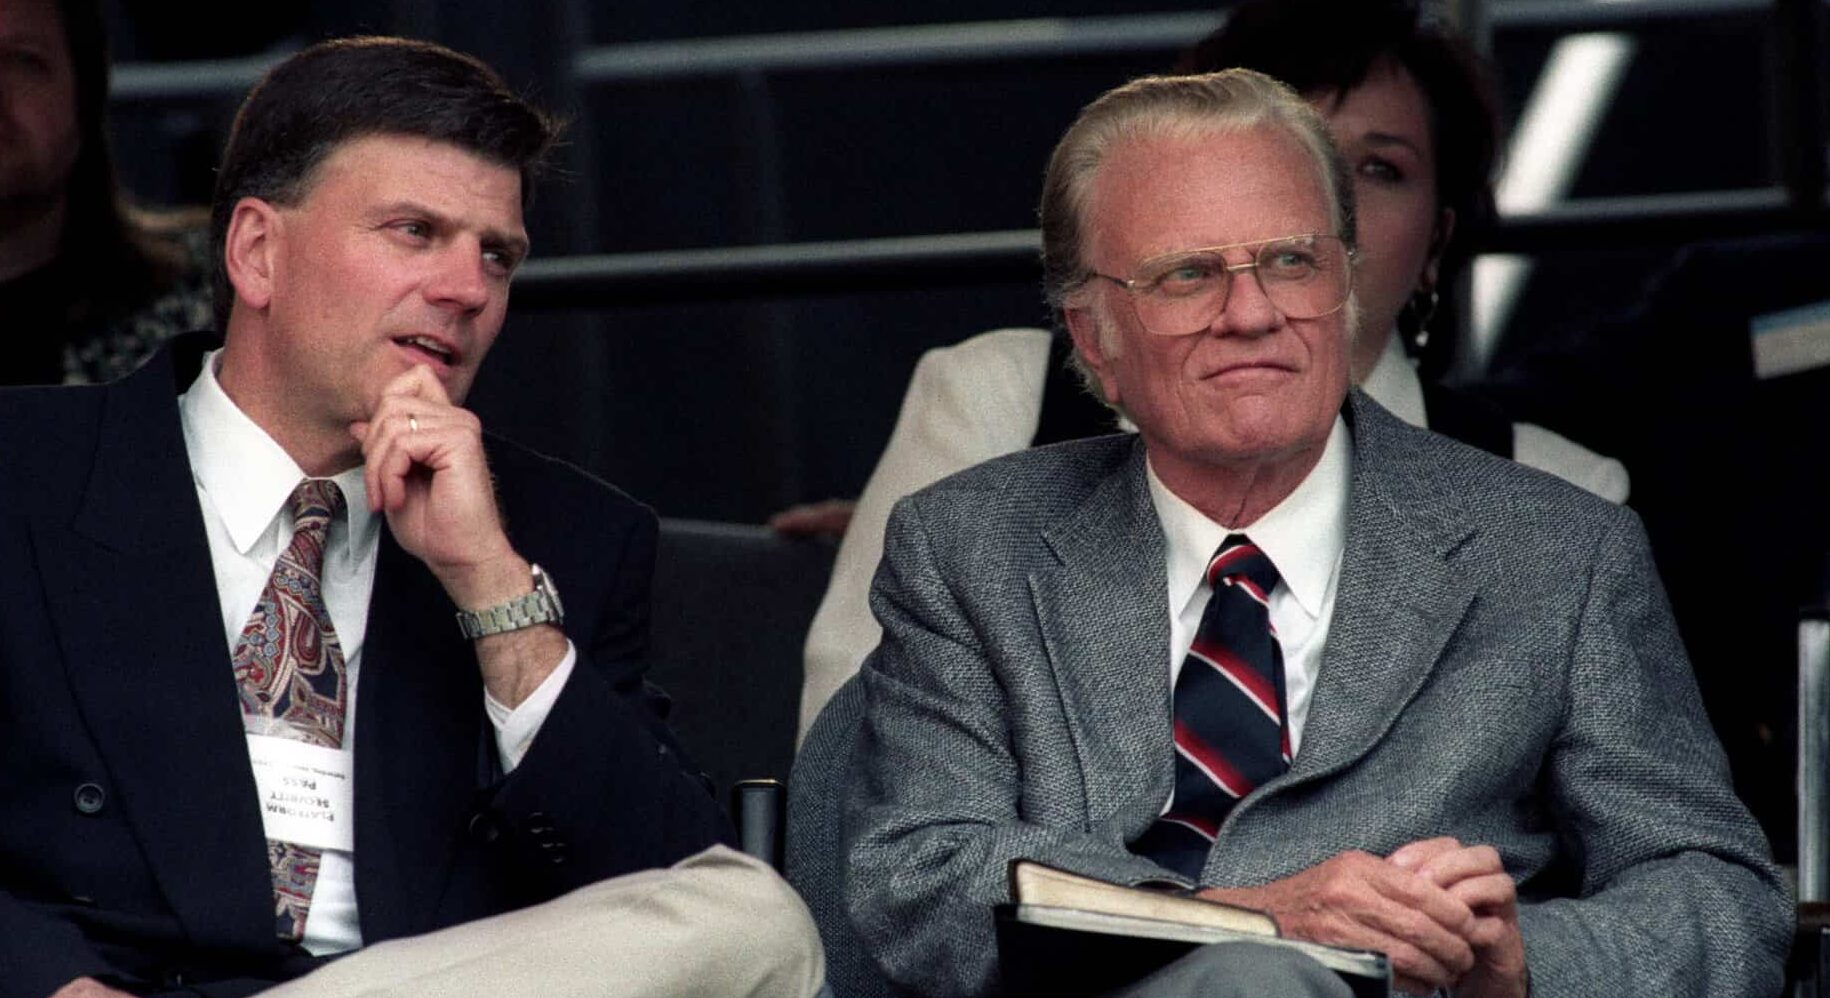 Billy Graham is shown seated in an auditorium type setting and wearing a grey suit.